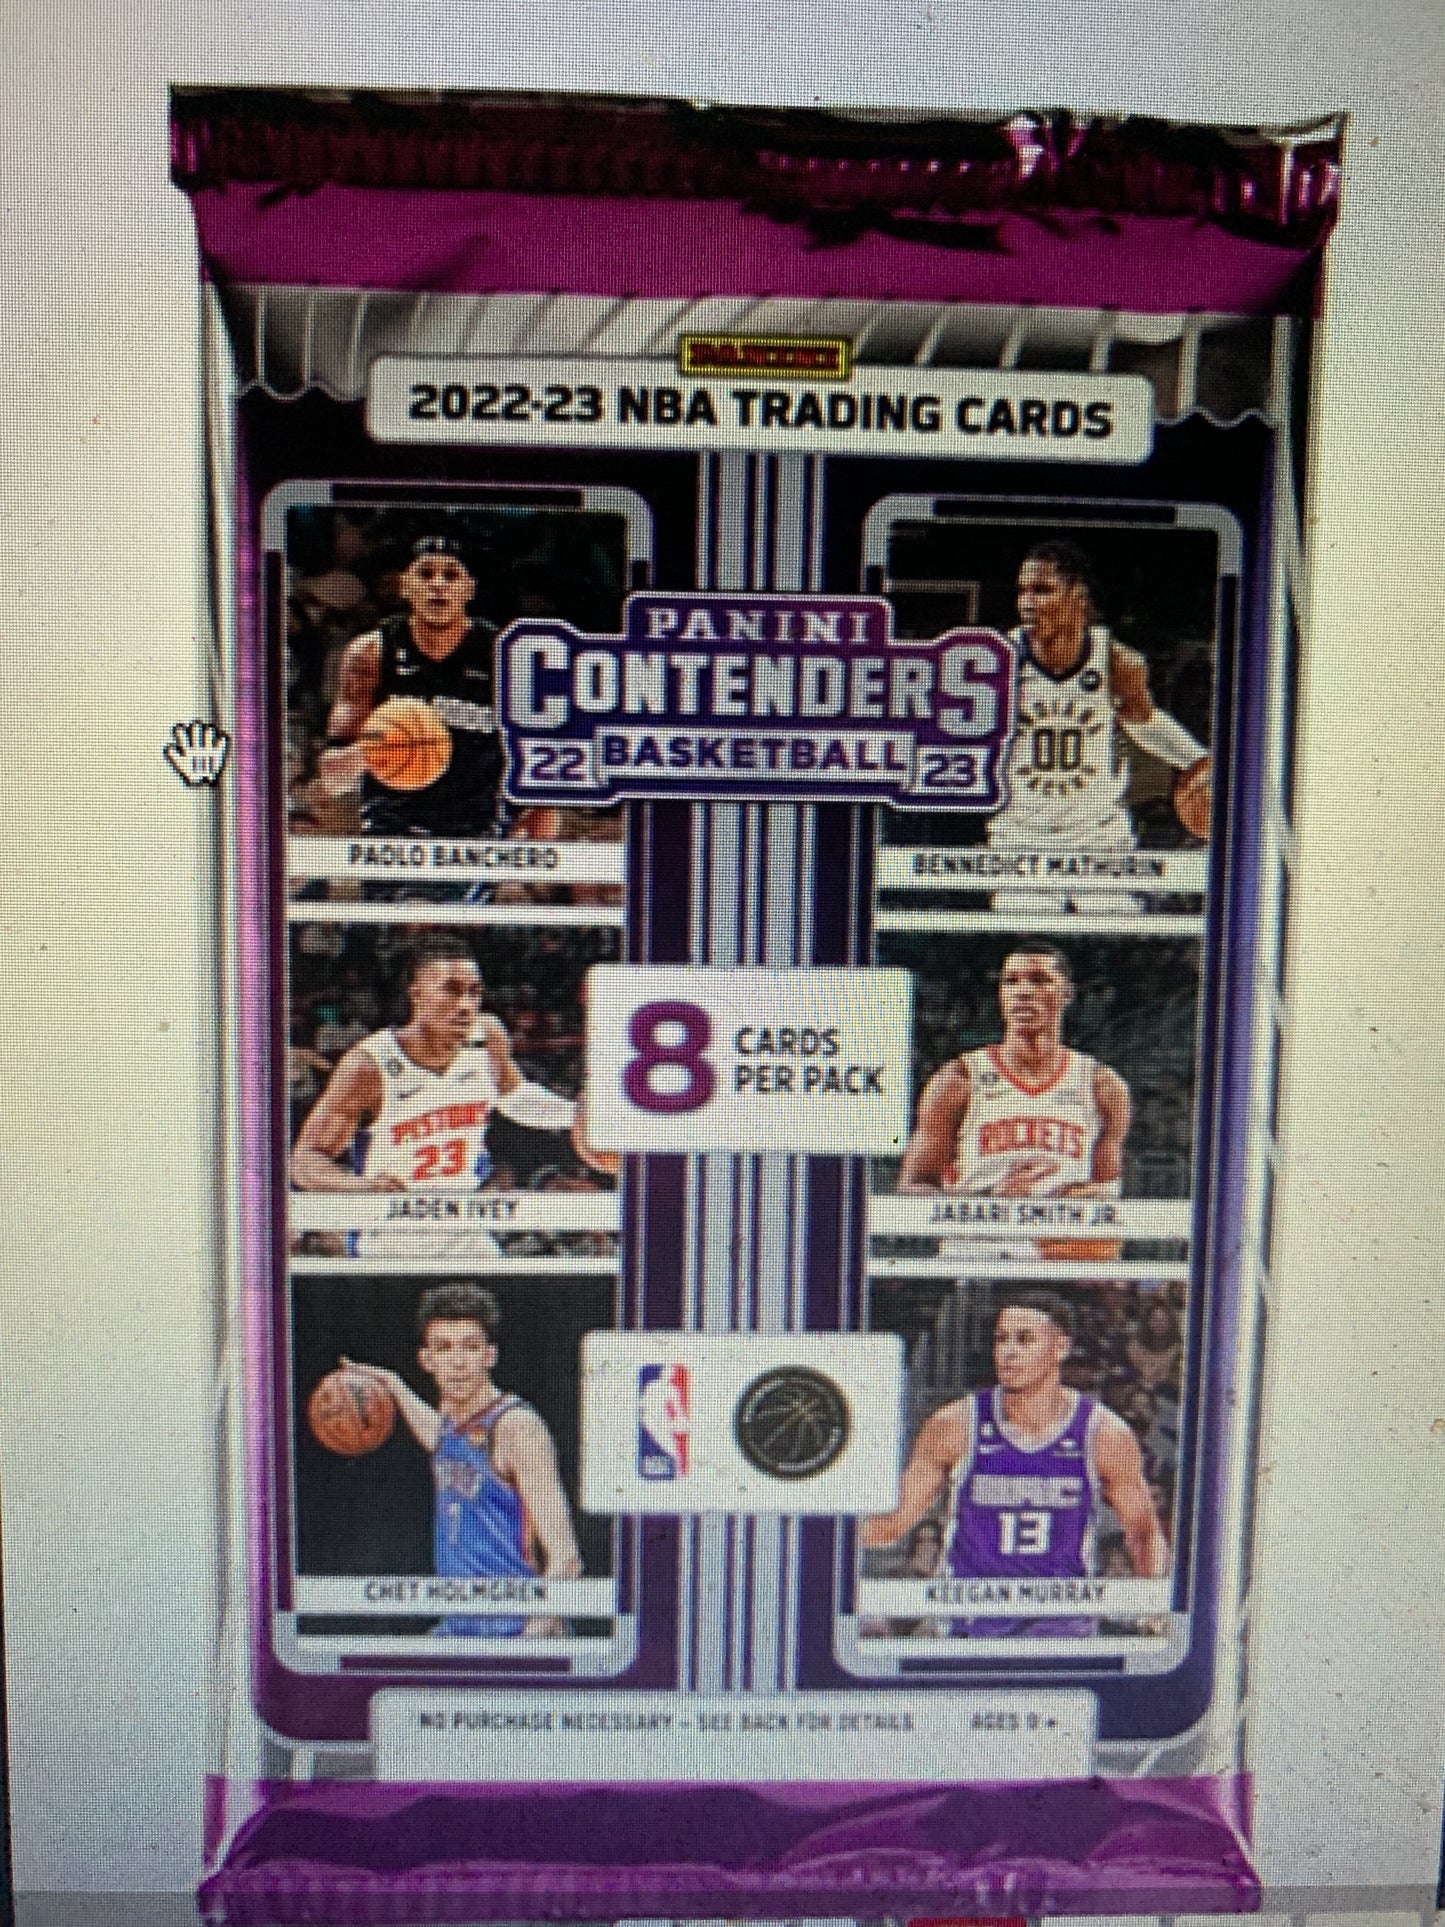 2022/23 Panini Contenders Basketball Hobby Pack. This listing is for a single hobby pack